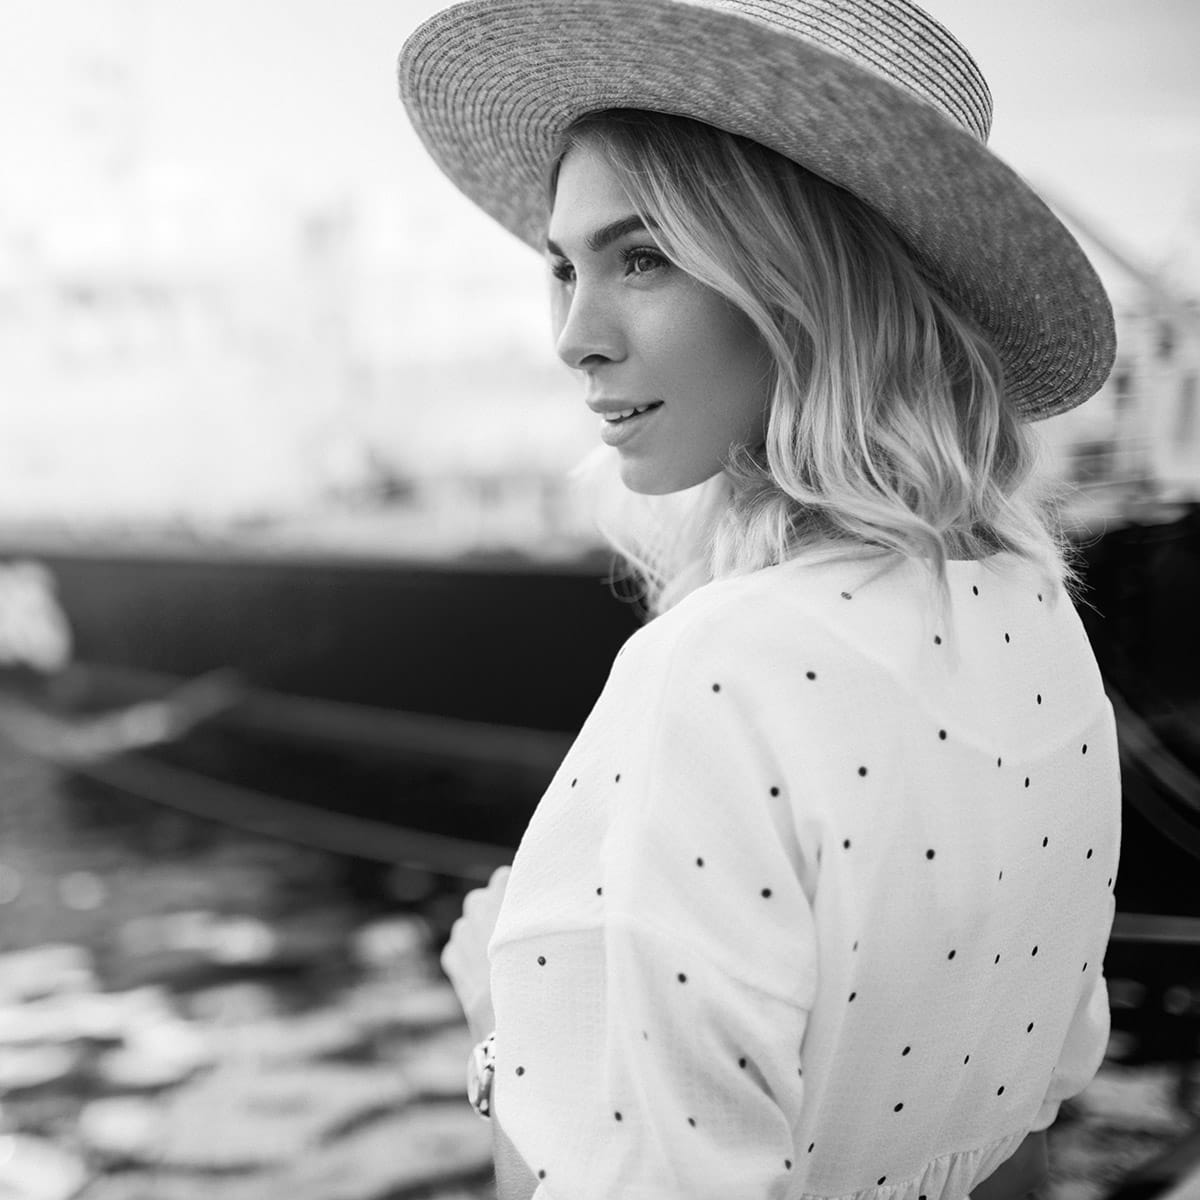 botox patient model in polka dot dress and hat looking across a body of water